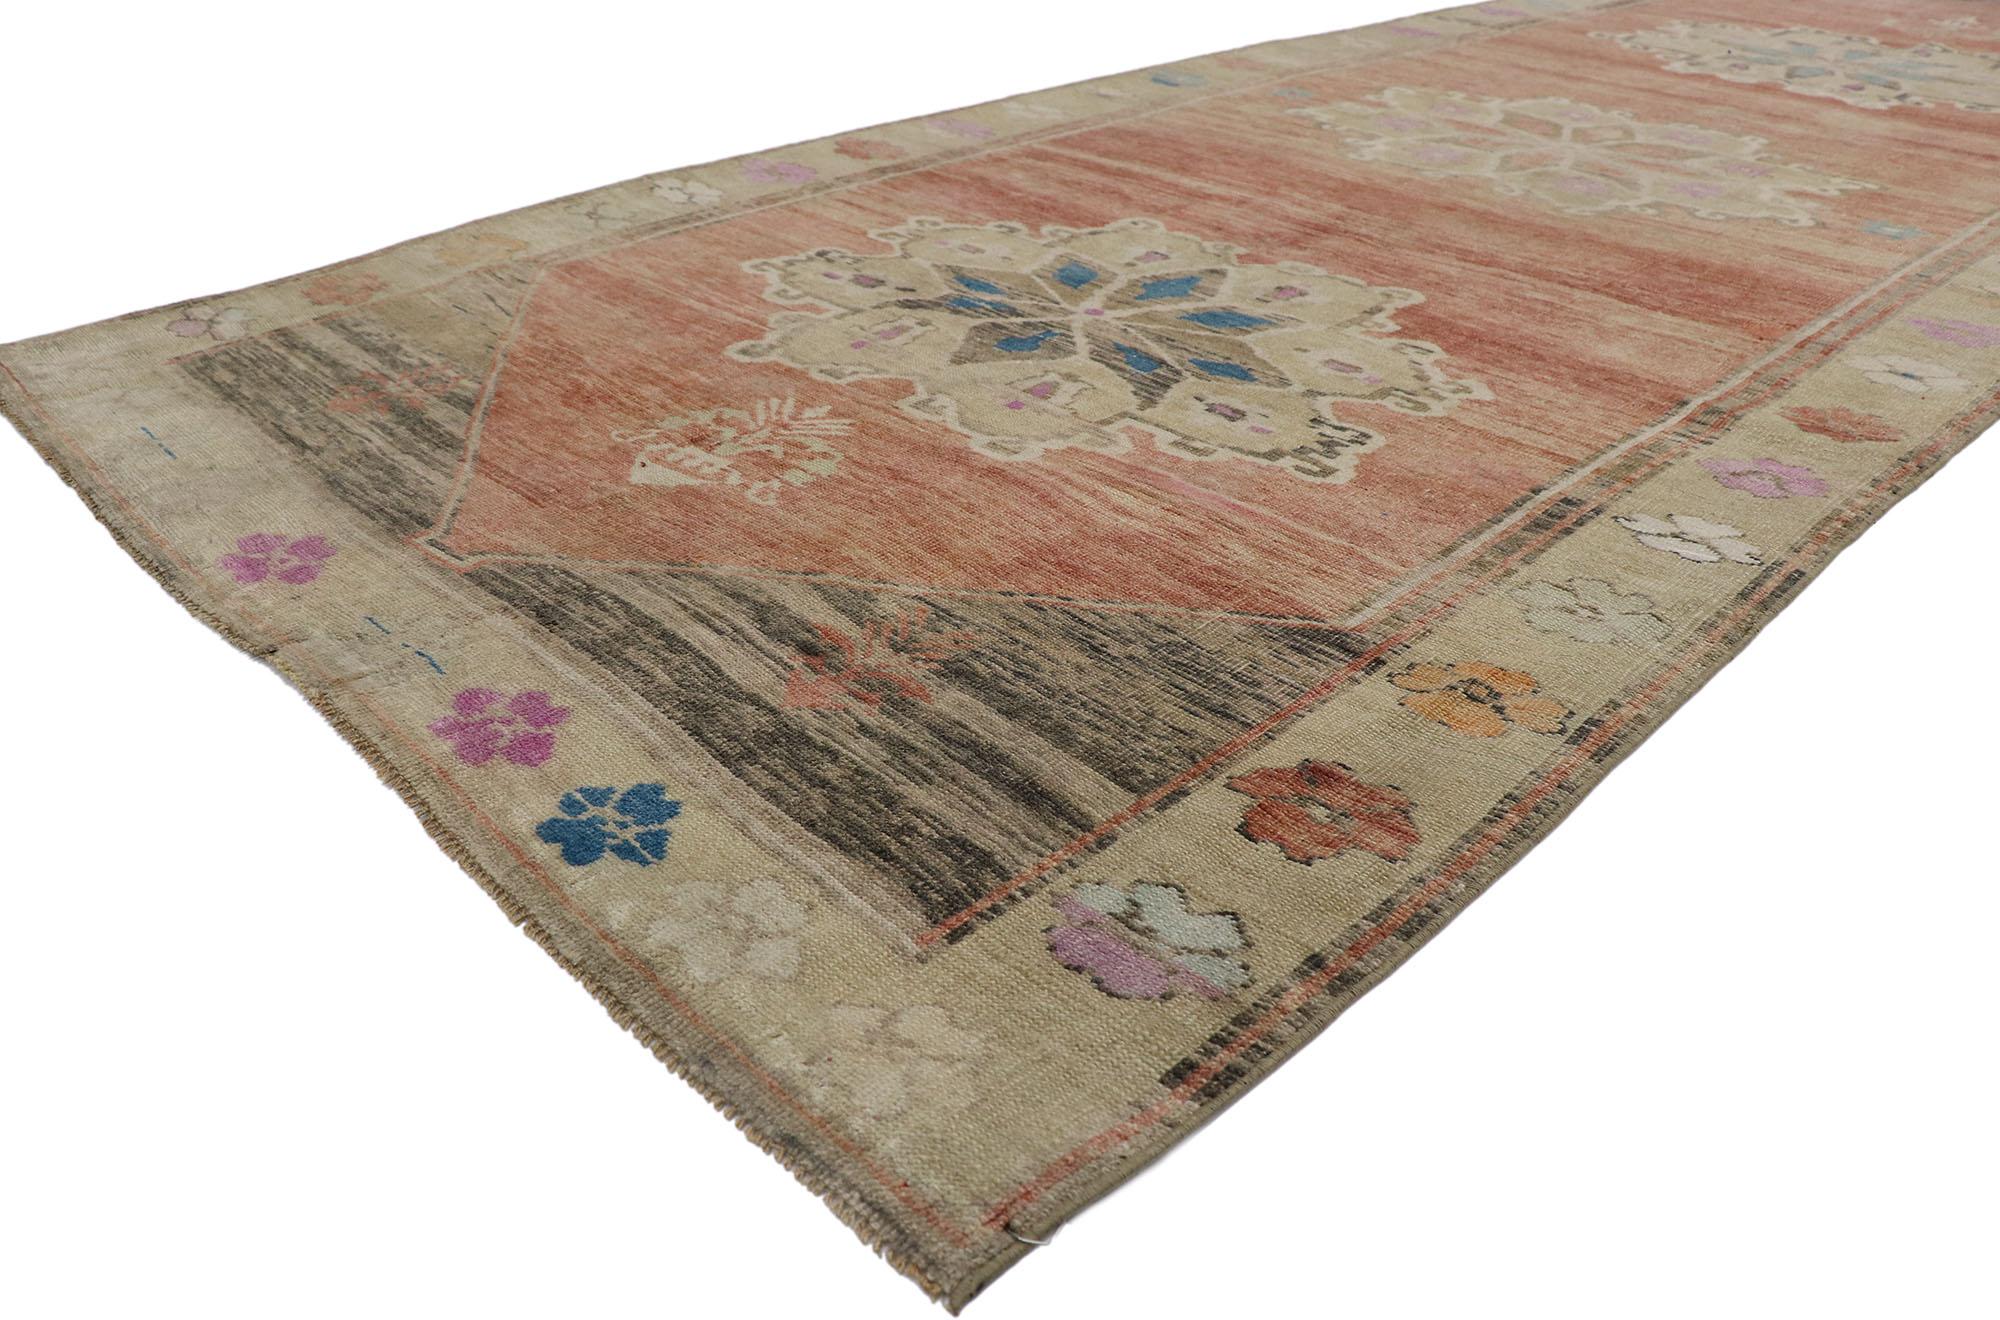 53578 Vintage Turkish Oushak gallery rug 04'09 x 12'02. Full of tiny details combined with beguiling beauty, this hand-knotted wool vintage Turkish Oushak gallery rug is a captivating vision of woven beauty. The abrashed brick red field features